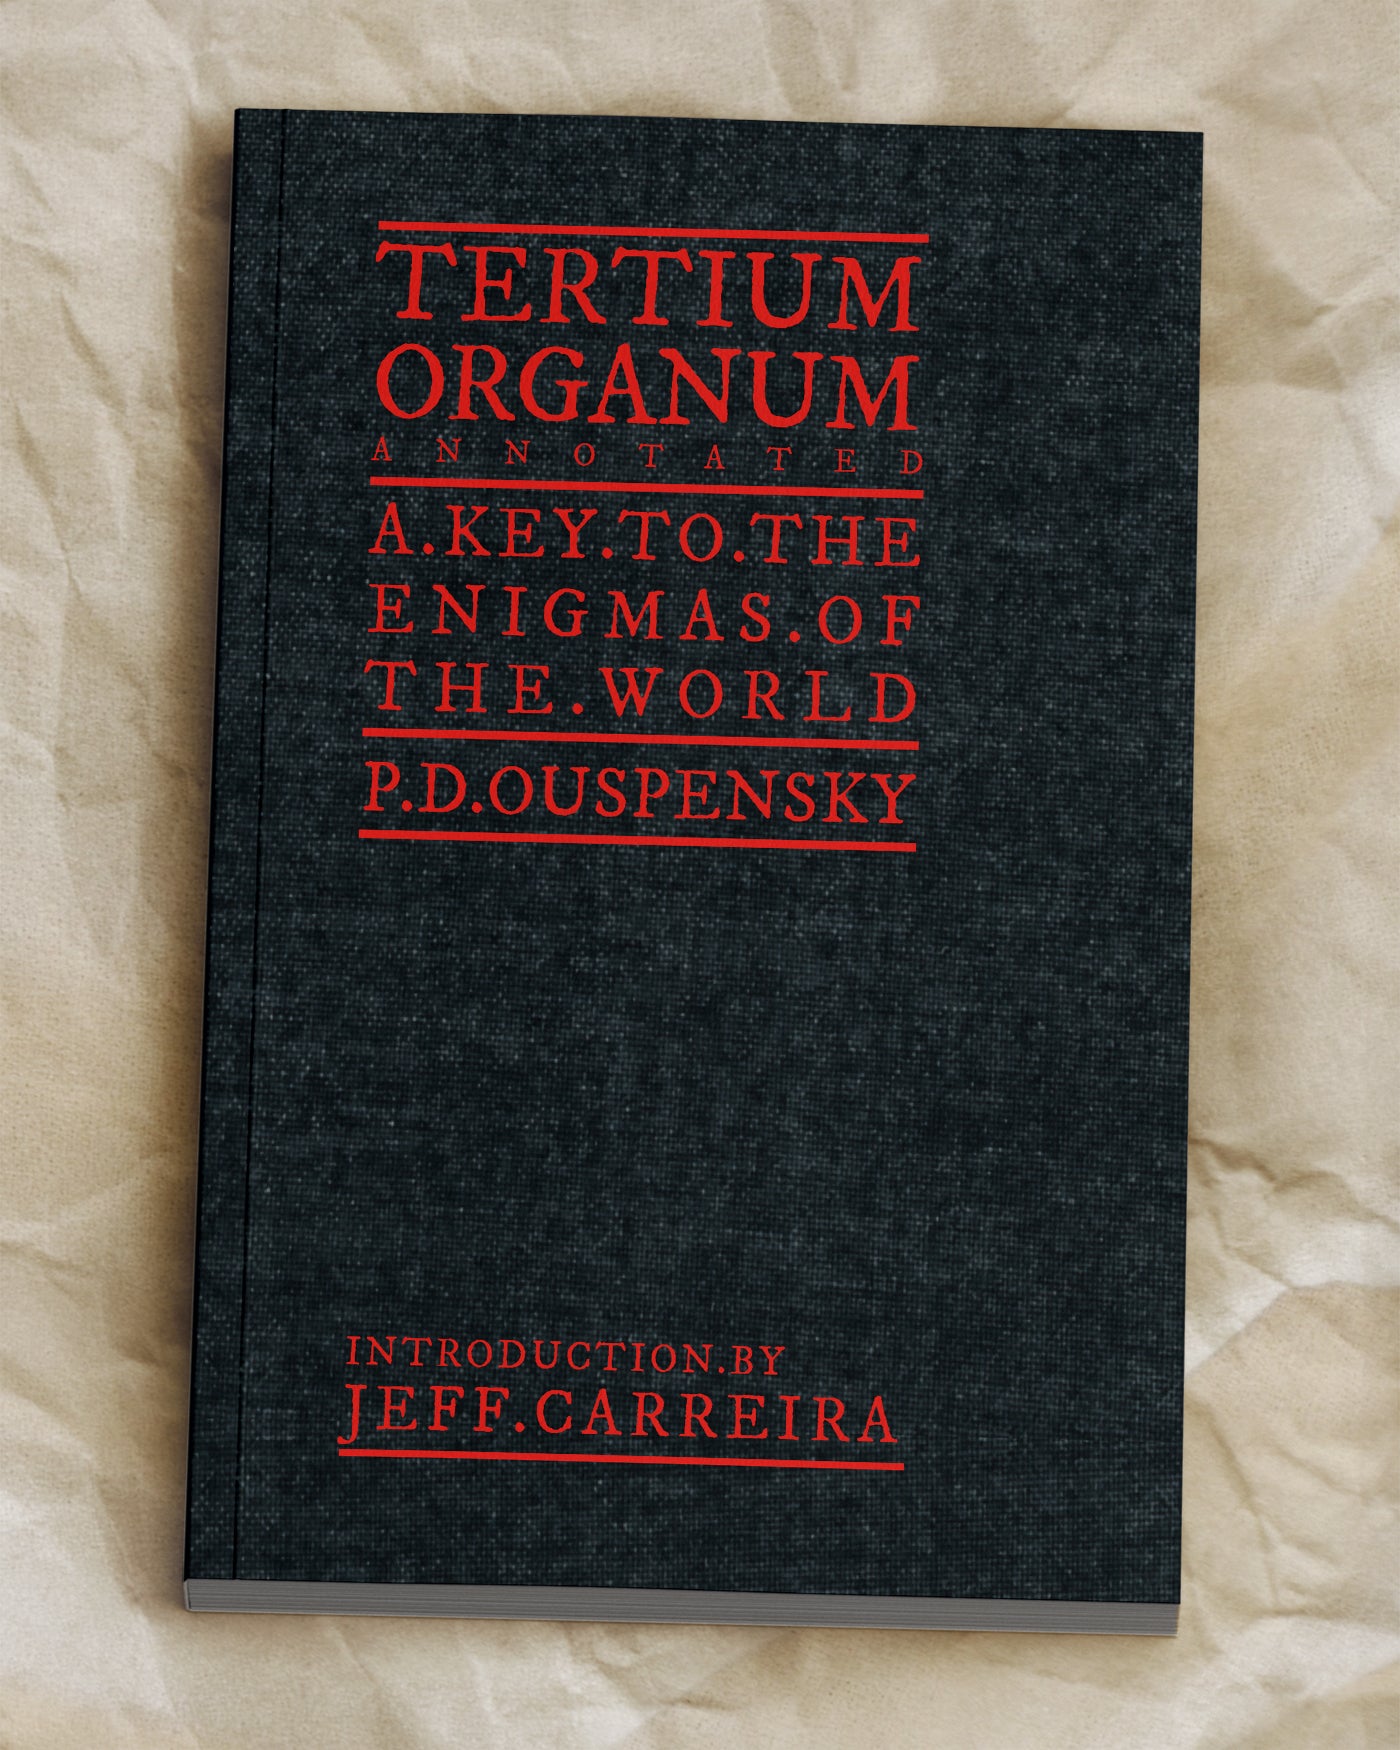 Tertium Organum (Annotated): The Third Canon of Thought - A Key To The Enigmas Of The World